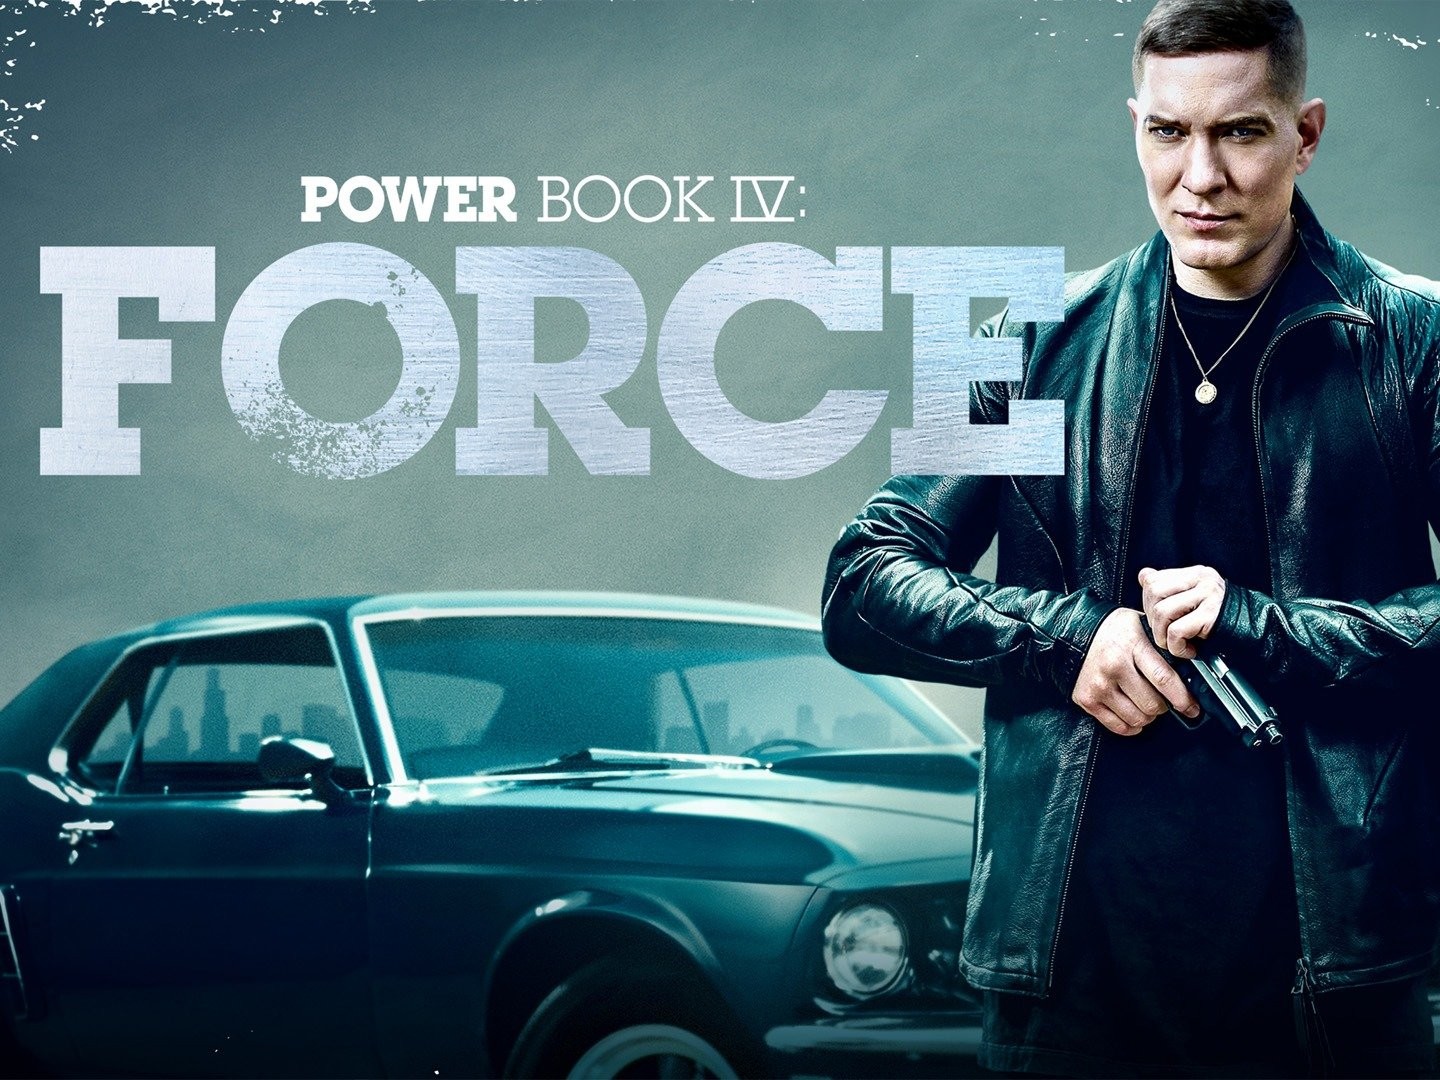 Power Book IV: Force season 2 release schedule – When's episode 9 out?